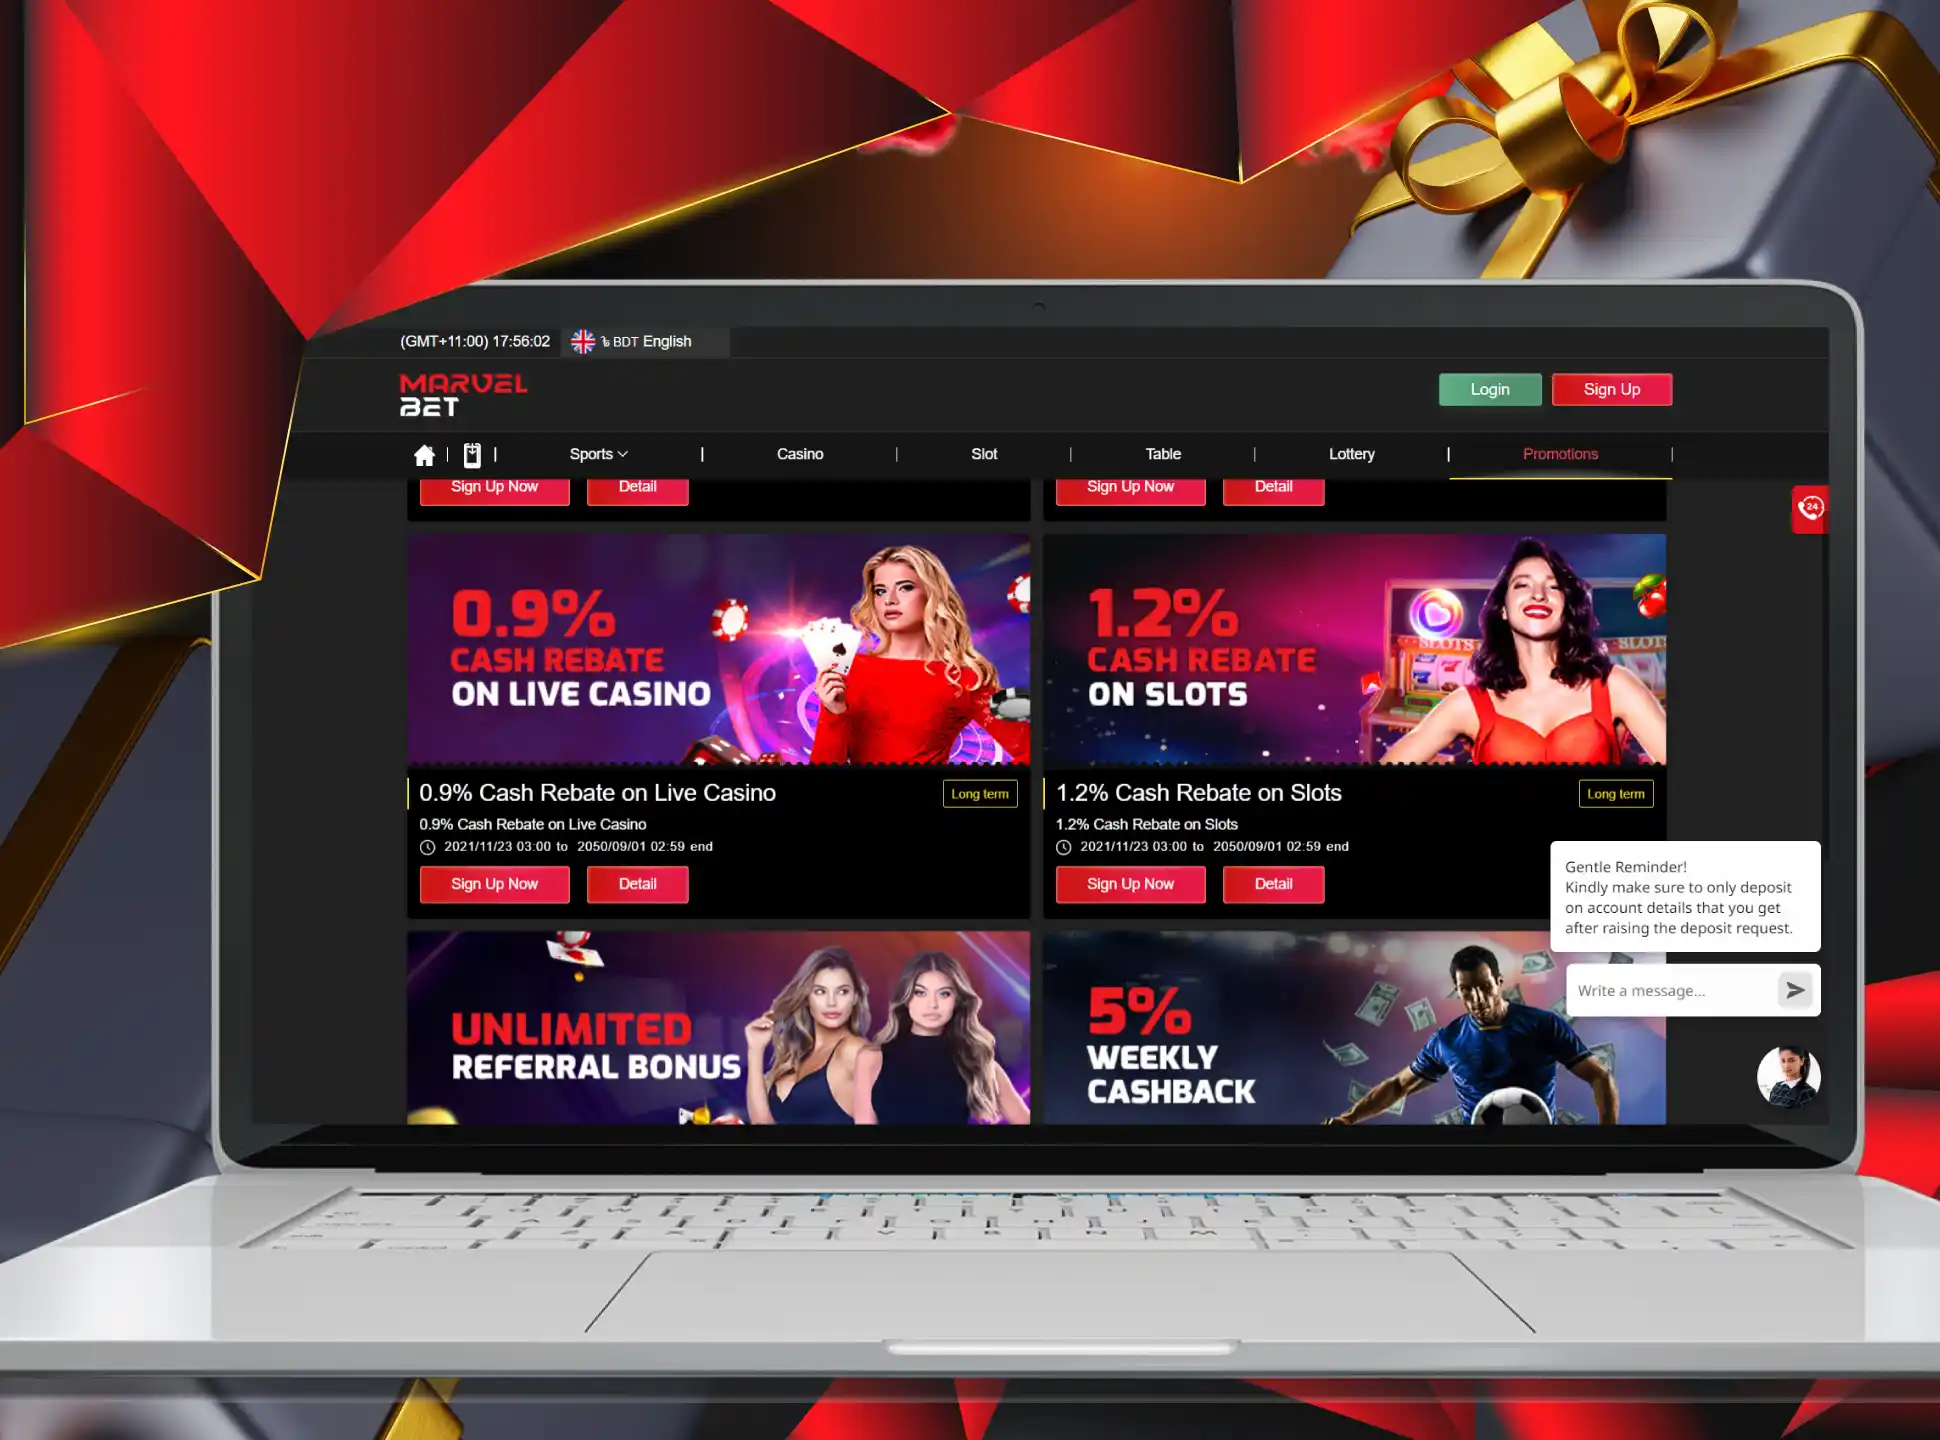 Find different bonuses on the special page of the MarvelBet site.